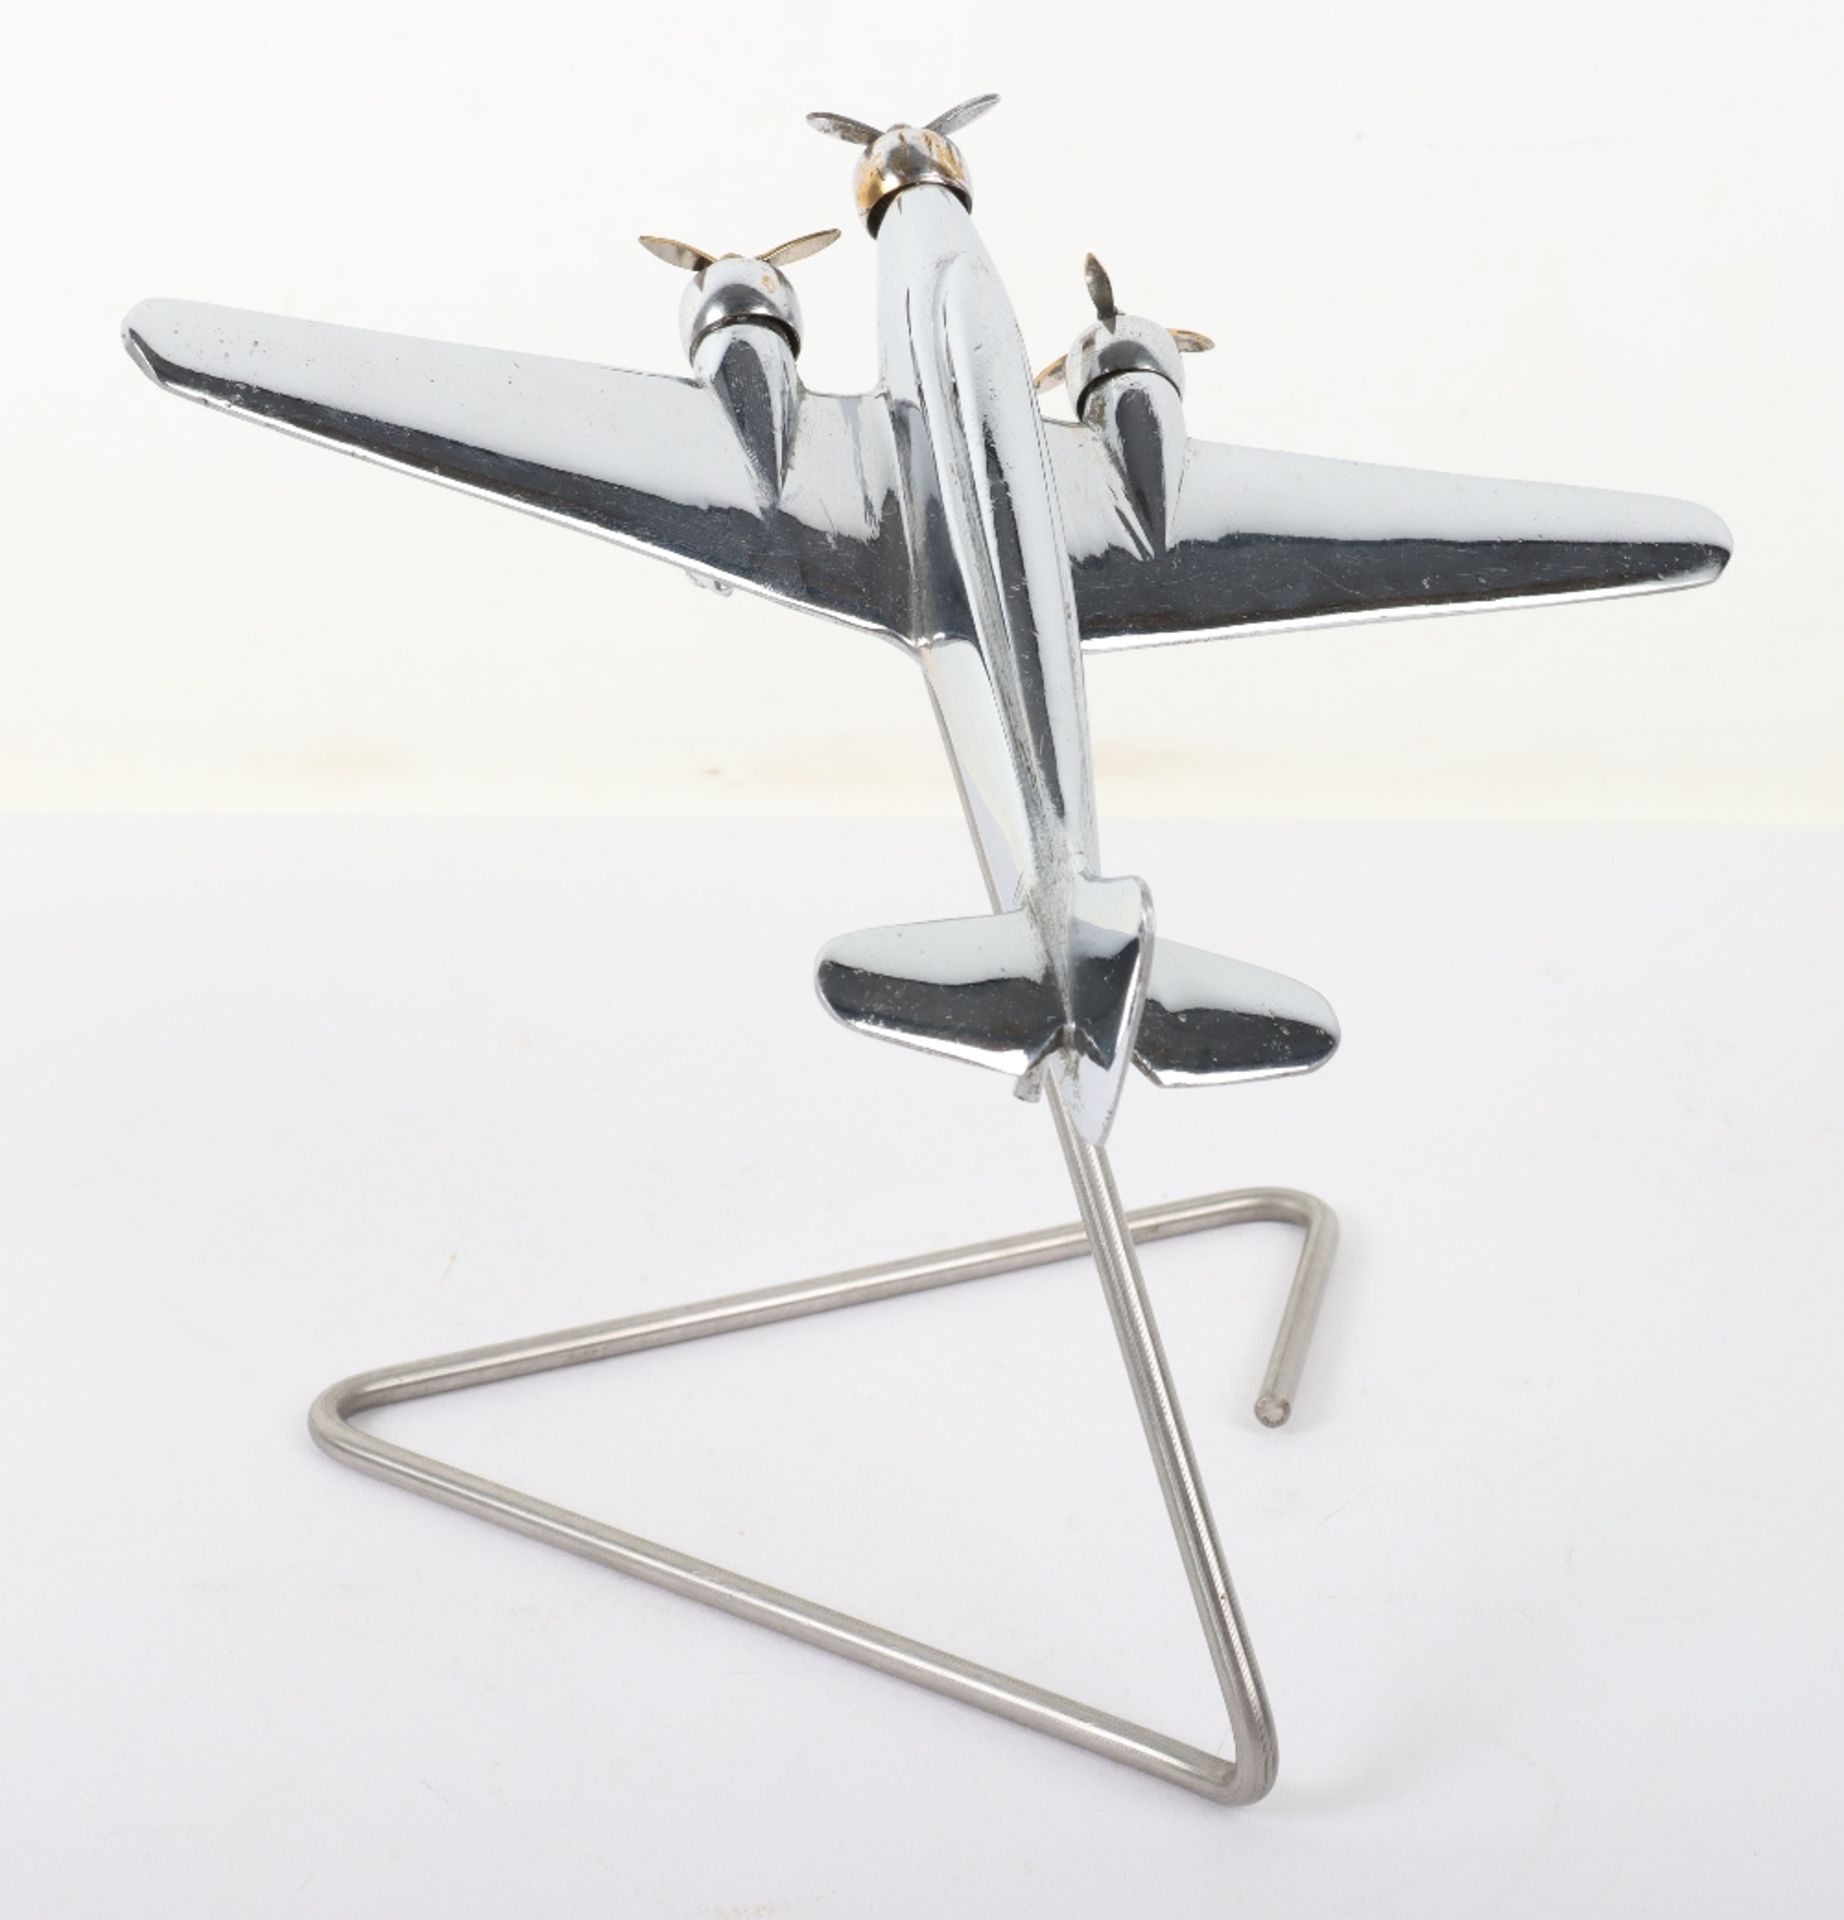 Desk Model of a Fighter Aircraft - Image 3 of 6